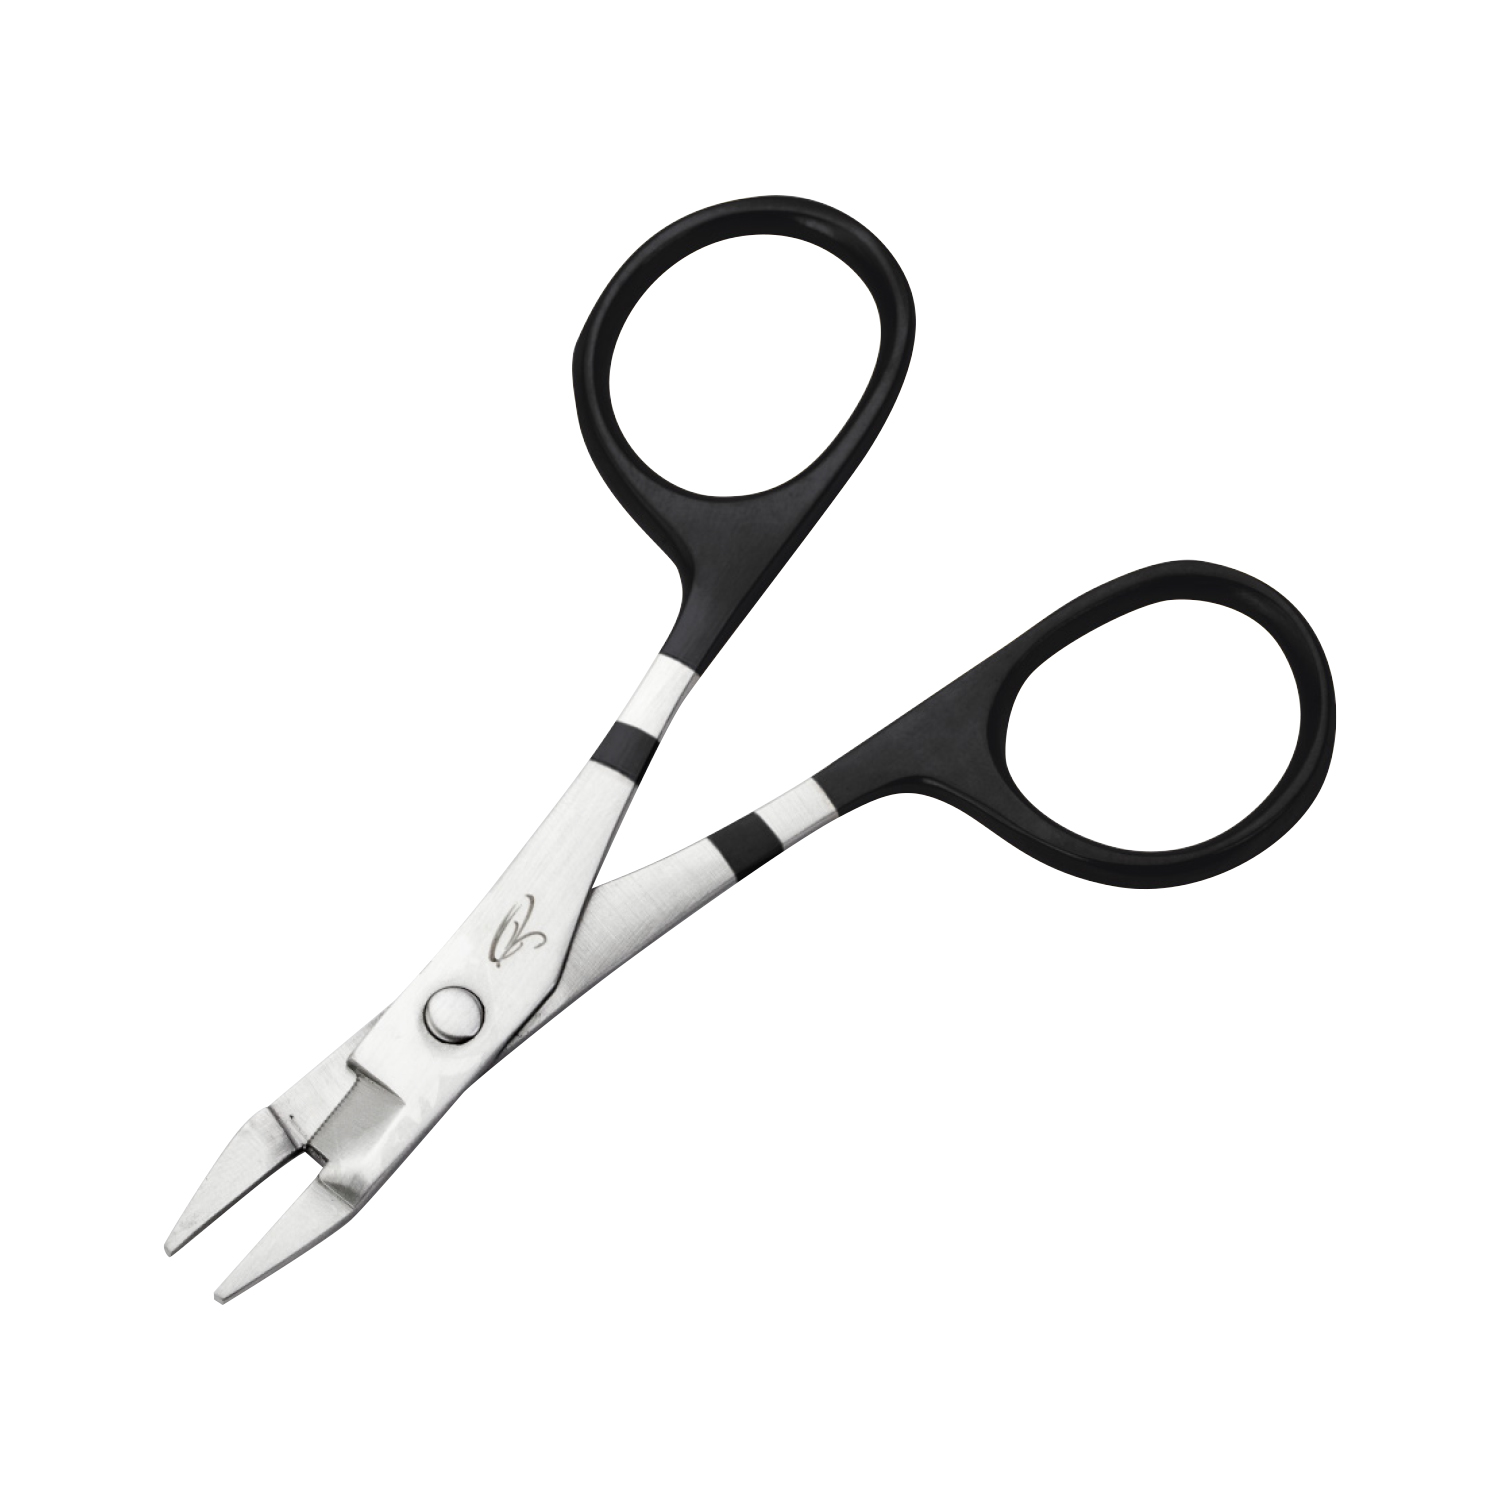 Boomerang Tool Company Original SNIP Fishing Line Cutter with Retractable  Tether and Stainless Steel Blades That Cut Braid Clean and Smooth  Everytime! (Black) 